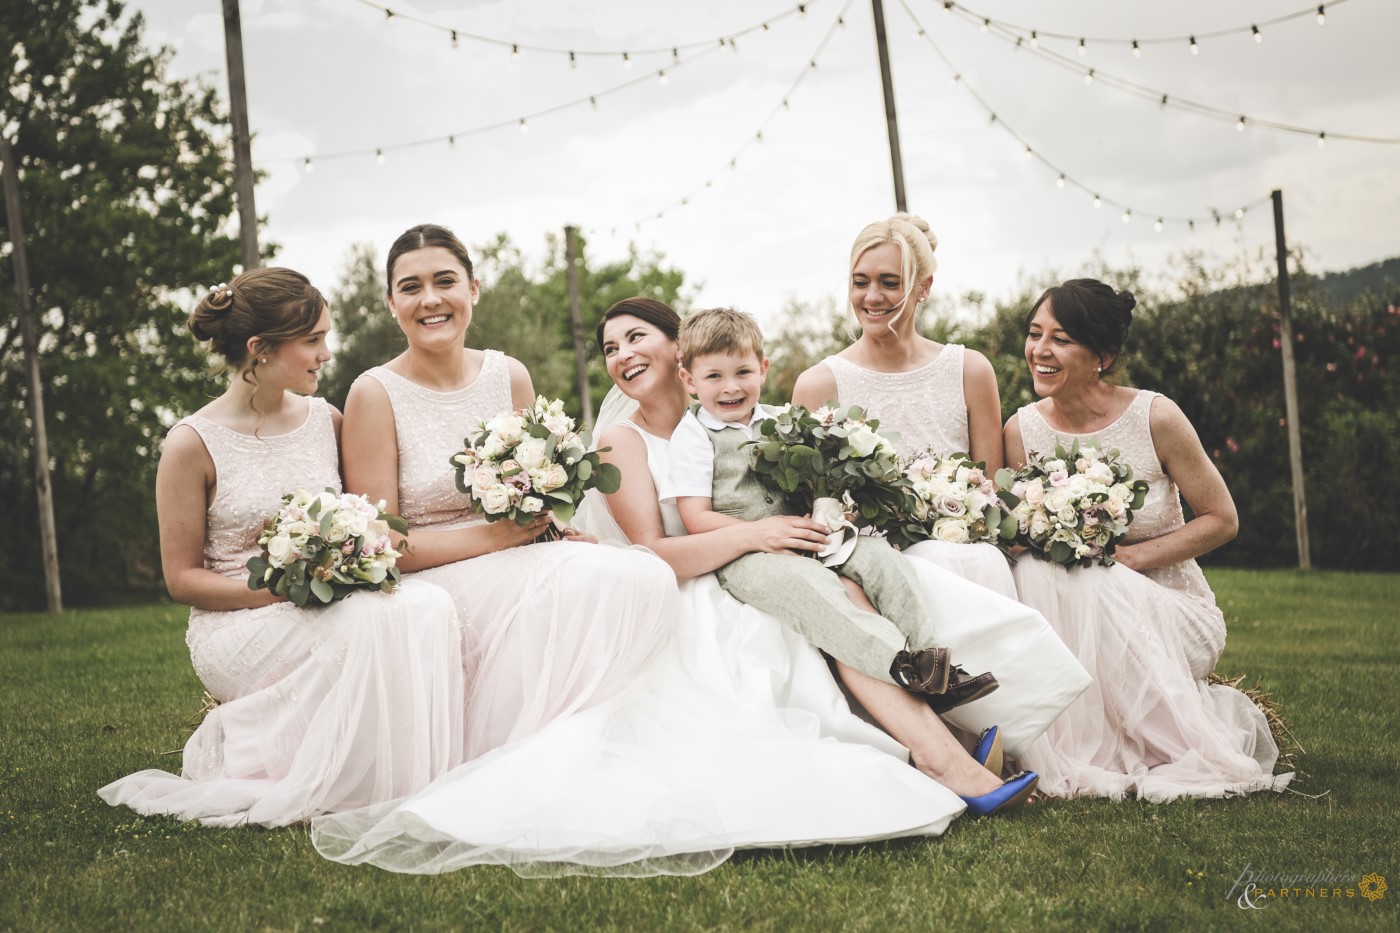 The bride with bridesmaids and pageboy.